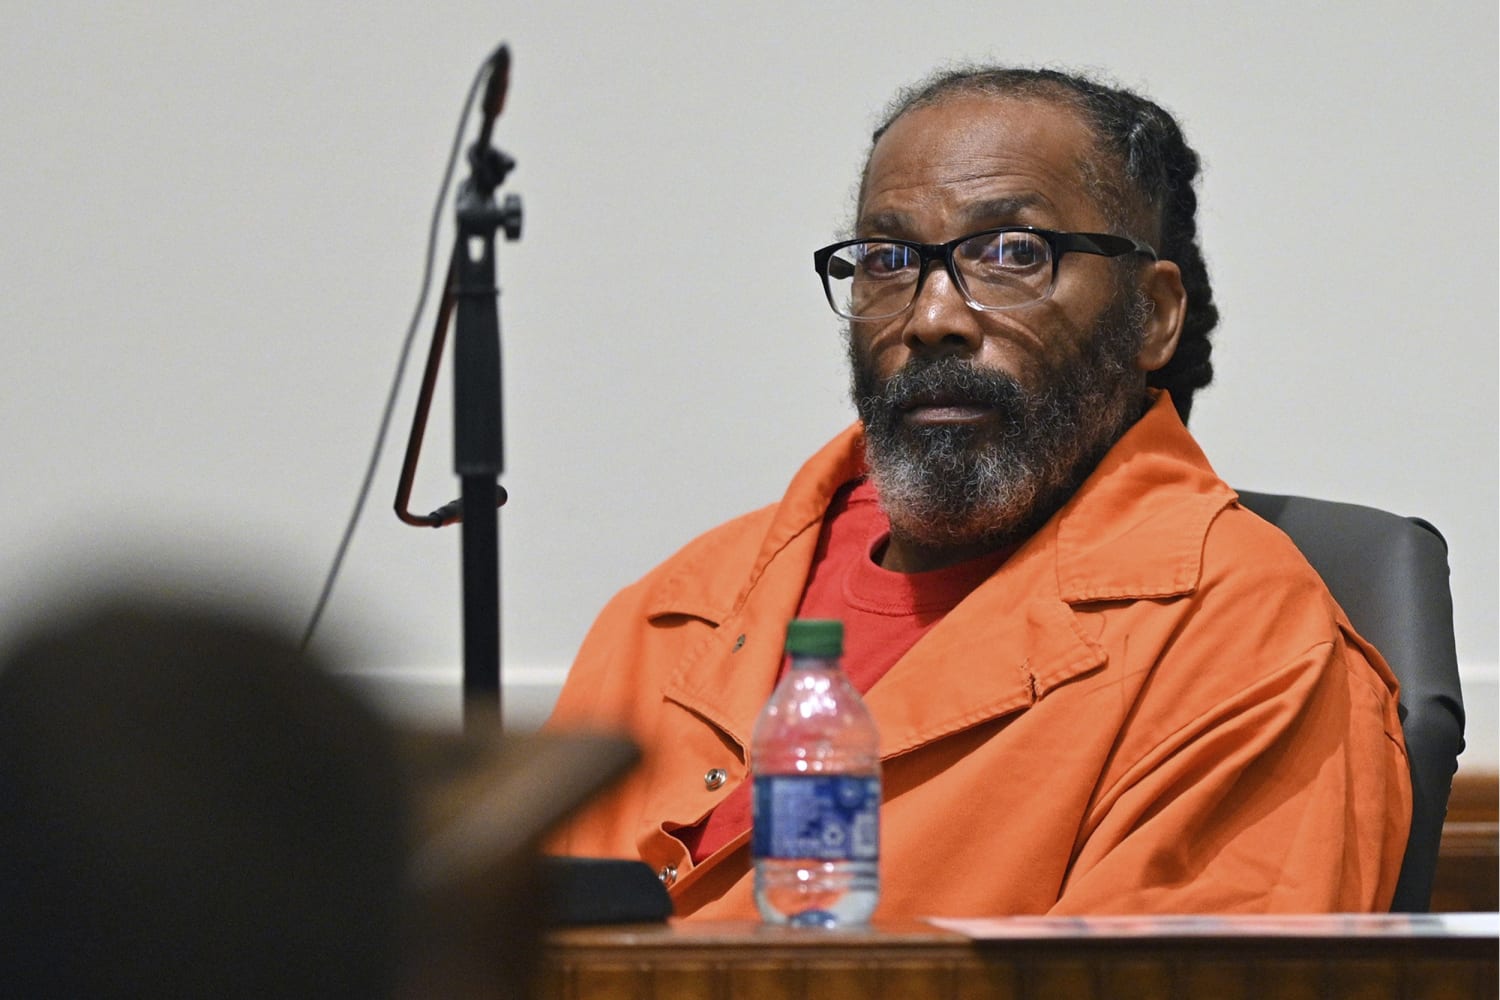 Missouri man jailed for over 40 years exonerated, judge says he was wrongfully convicted in 3 killings